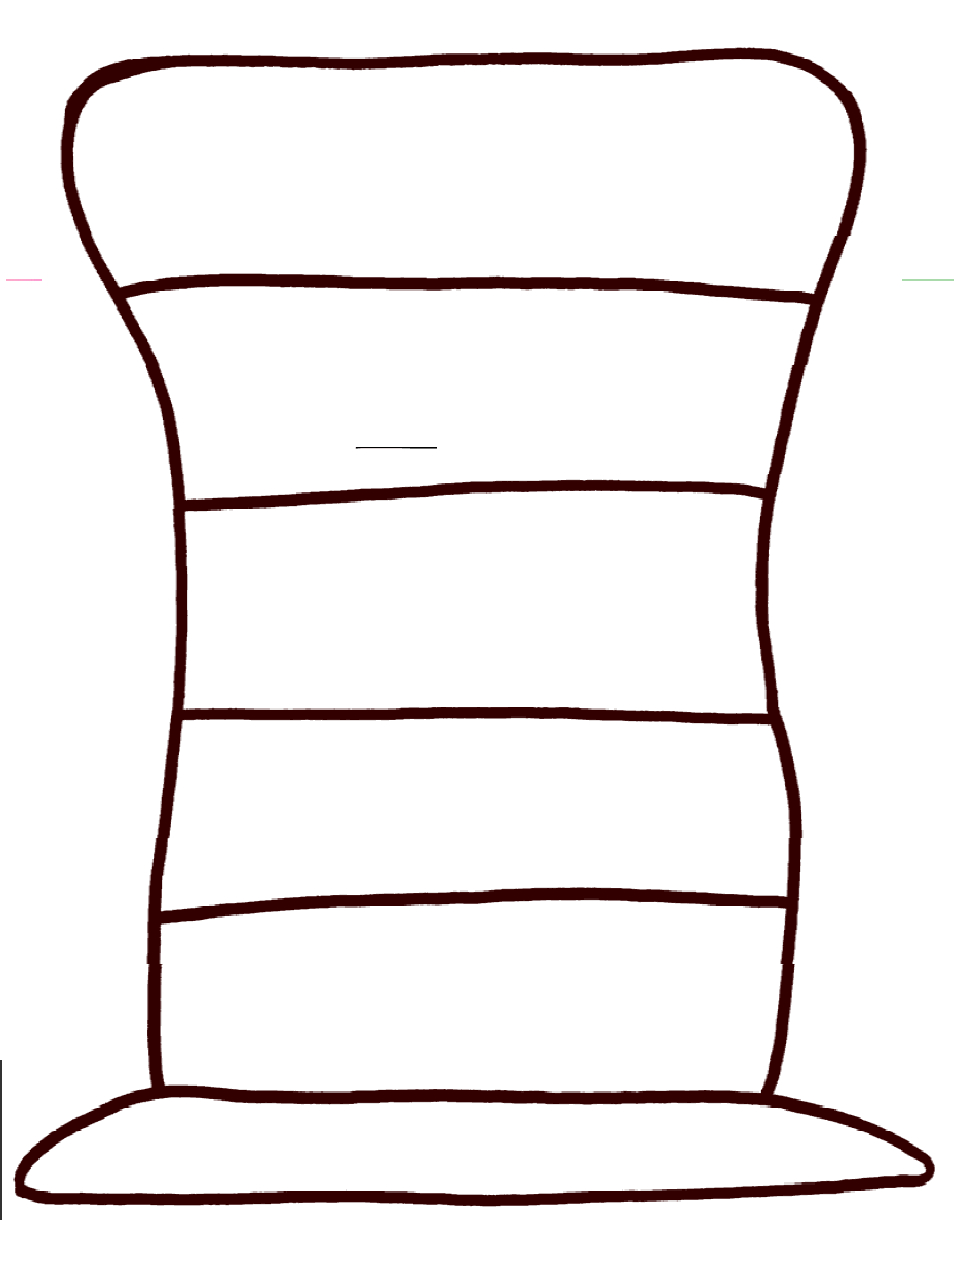 Dr Seuss Hat Pattern.pdf Use To Divide The Sections Up, Do Pertaining To Blank Cat In The Hat Template